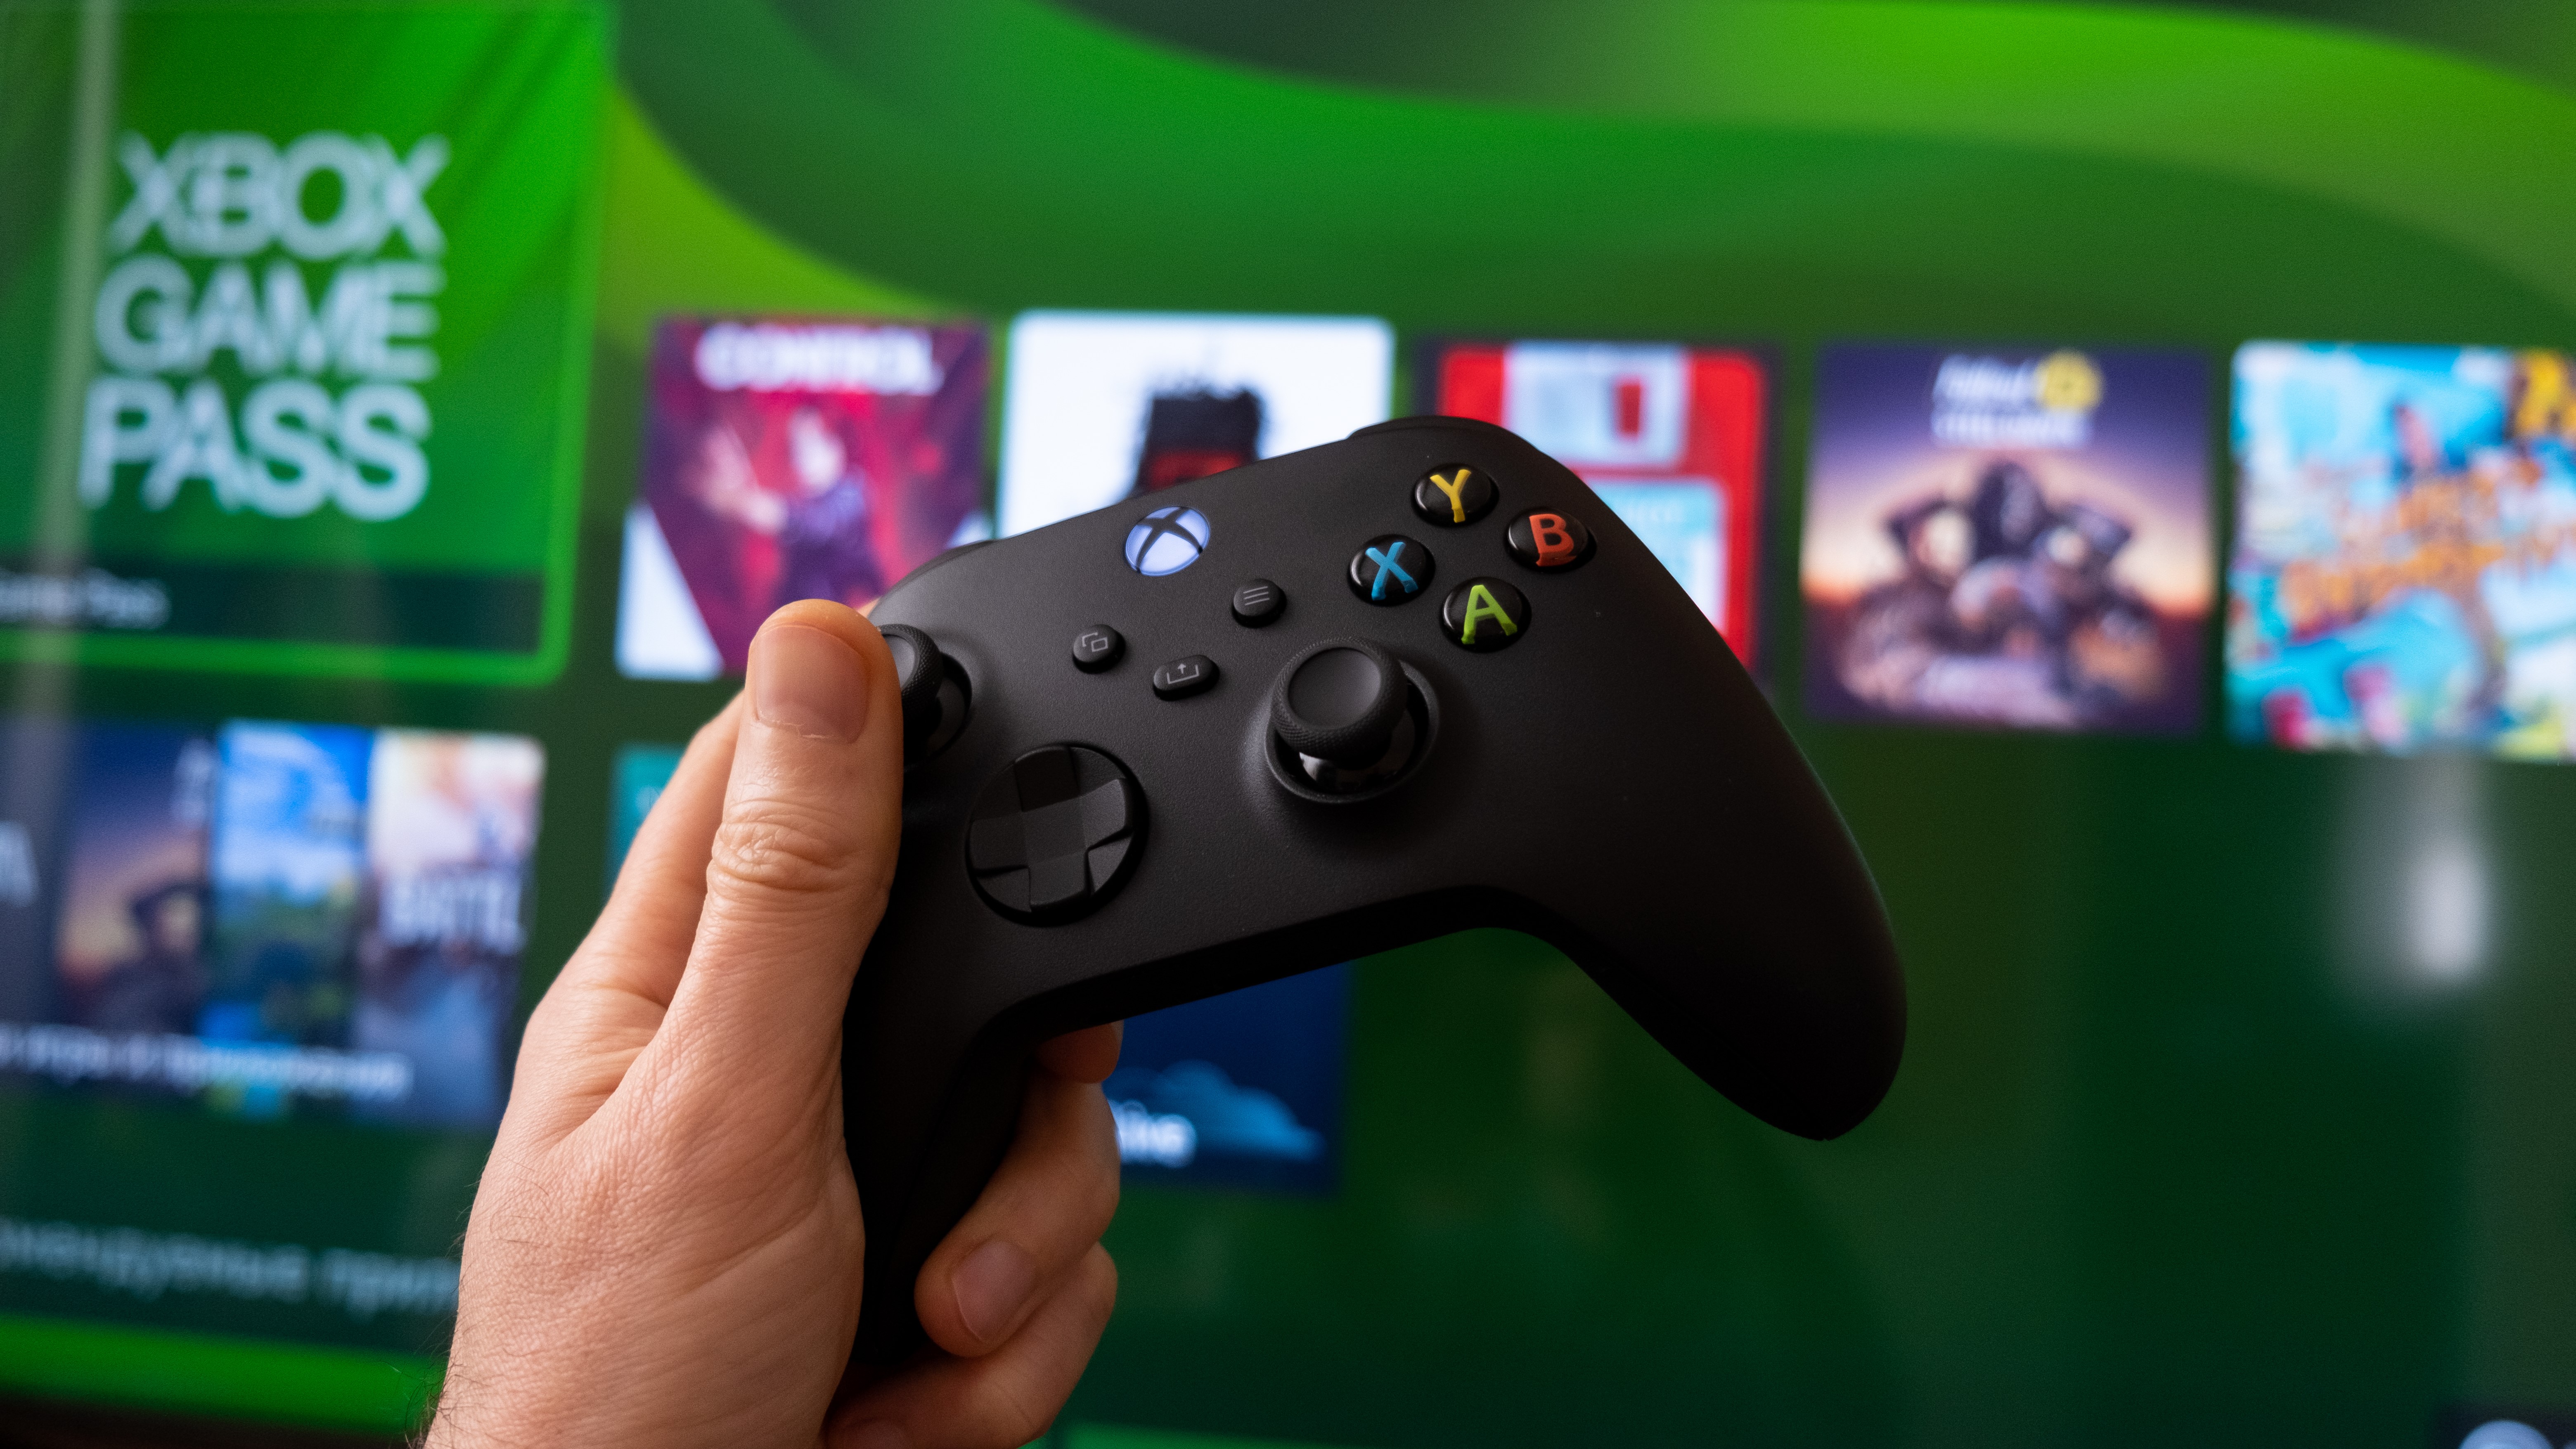 An image of an Xbox controller and Xbox Game Pass